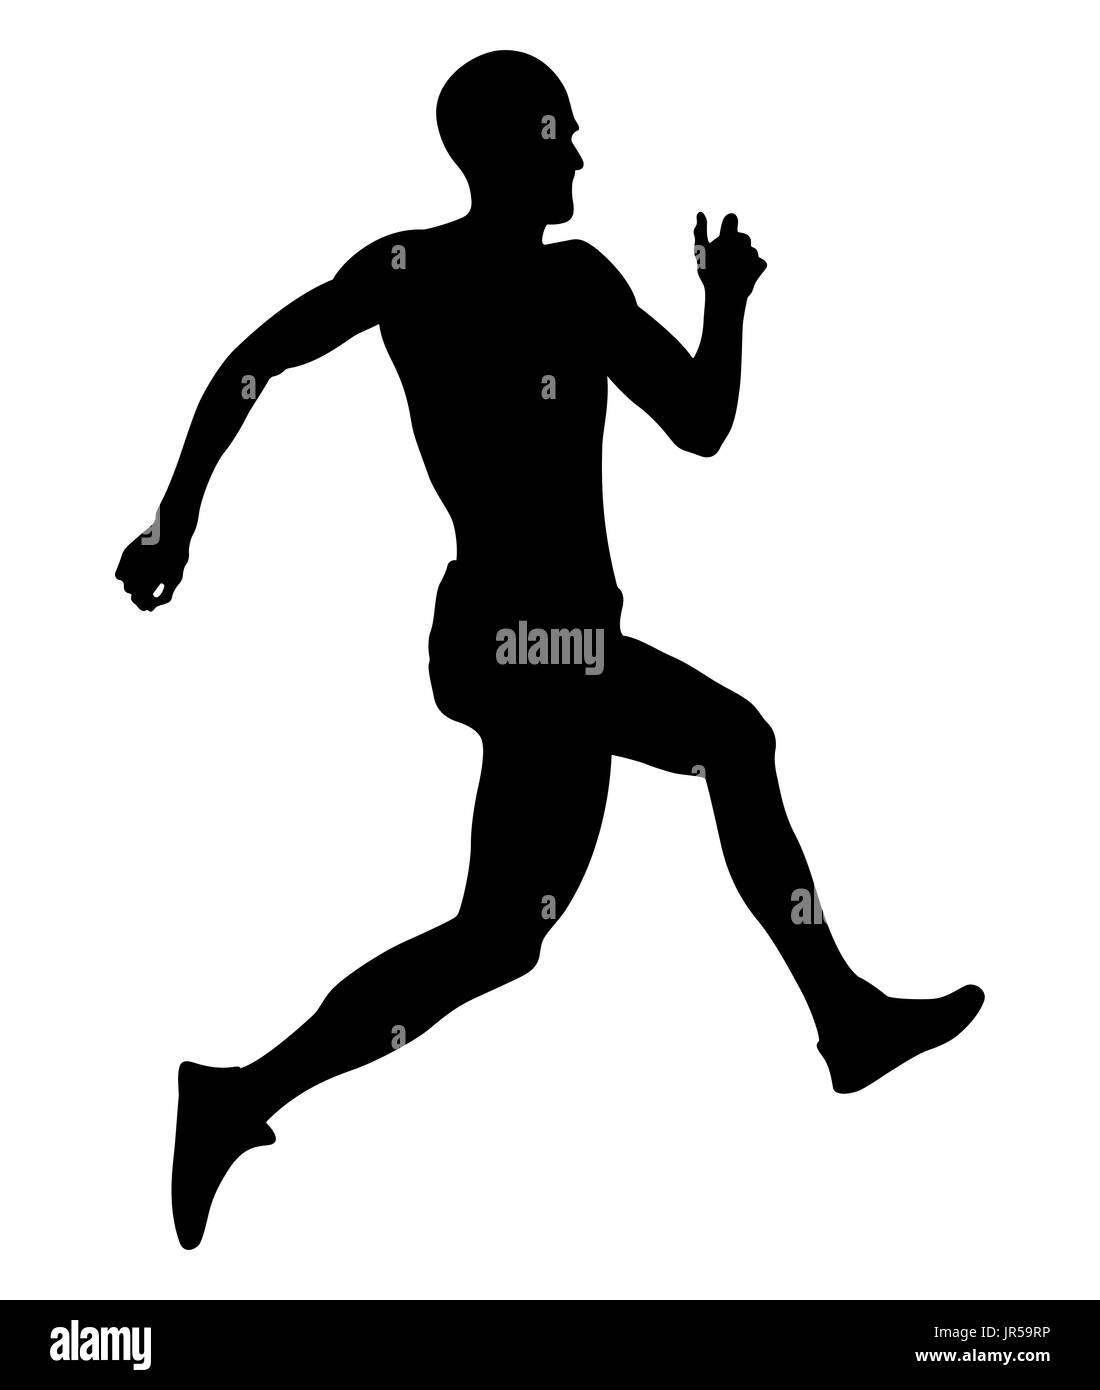 jump and flying men athlete jumper black silhouette Stock Photo